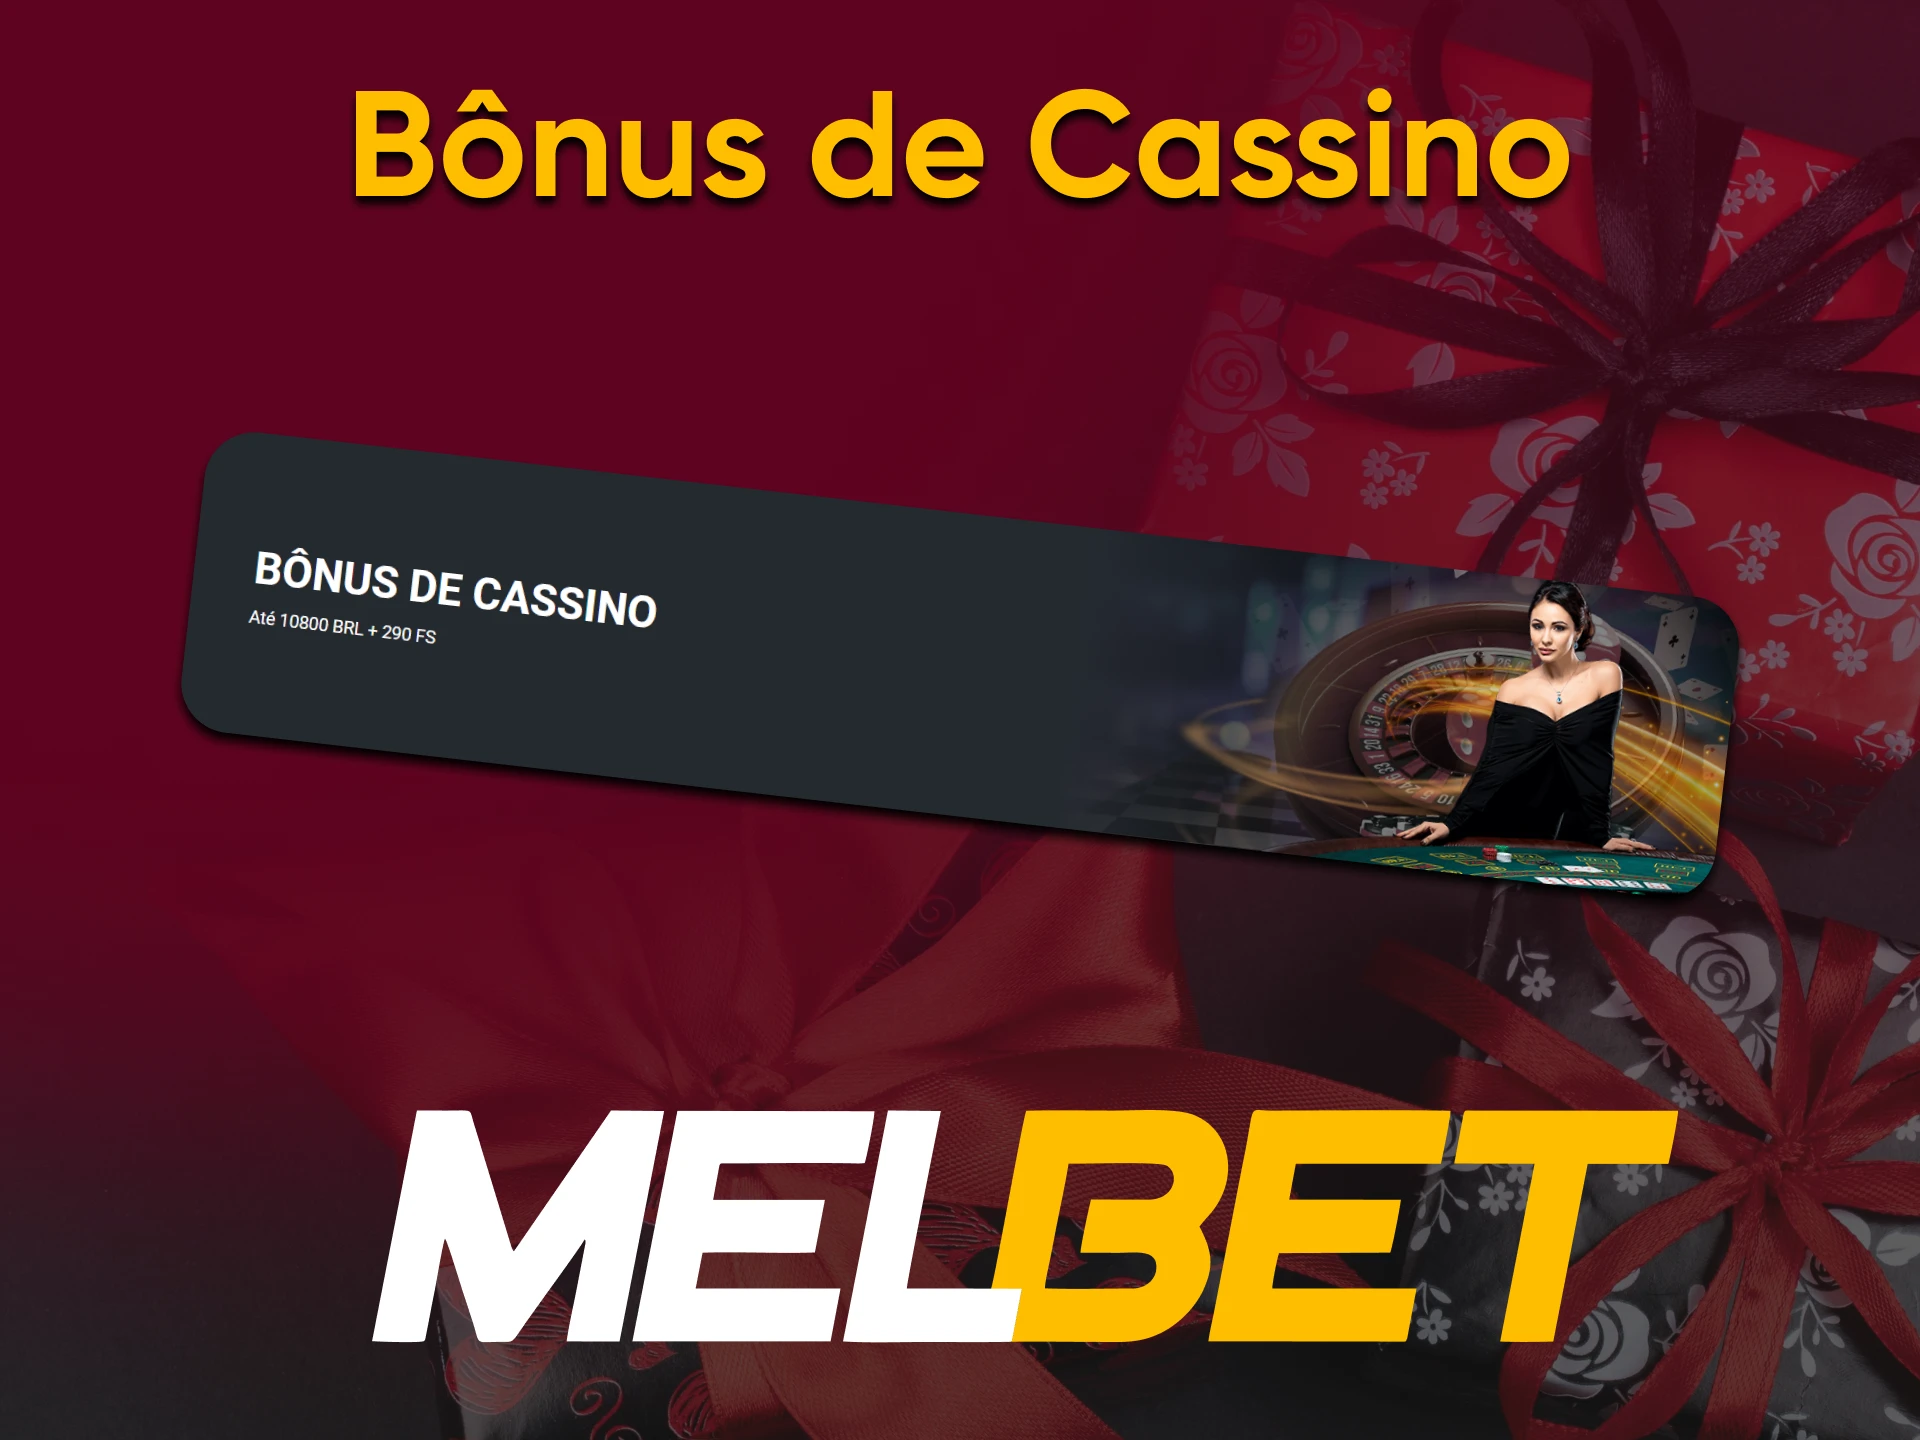 The Melbet website has a welcome bonus for playing at the casino.